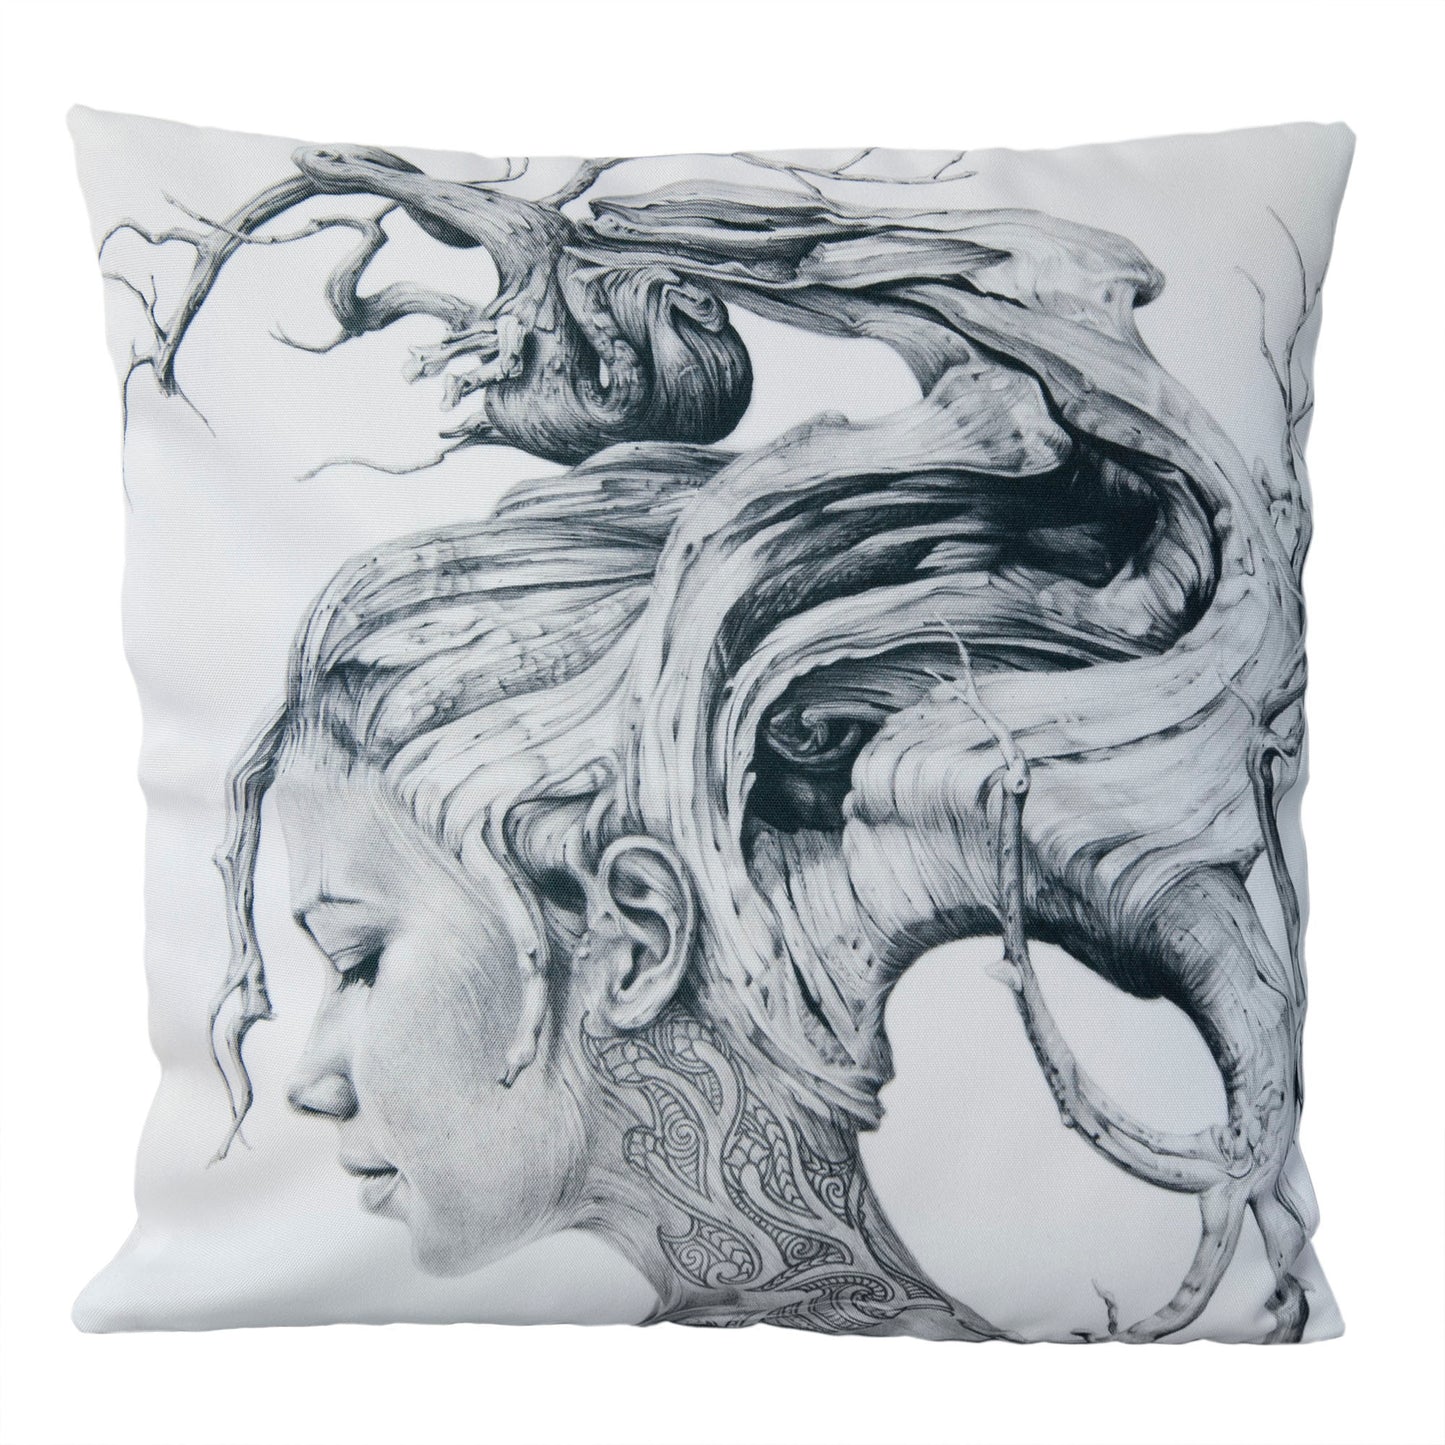 Cushion cover featuring 'Contemplation' artwork